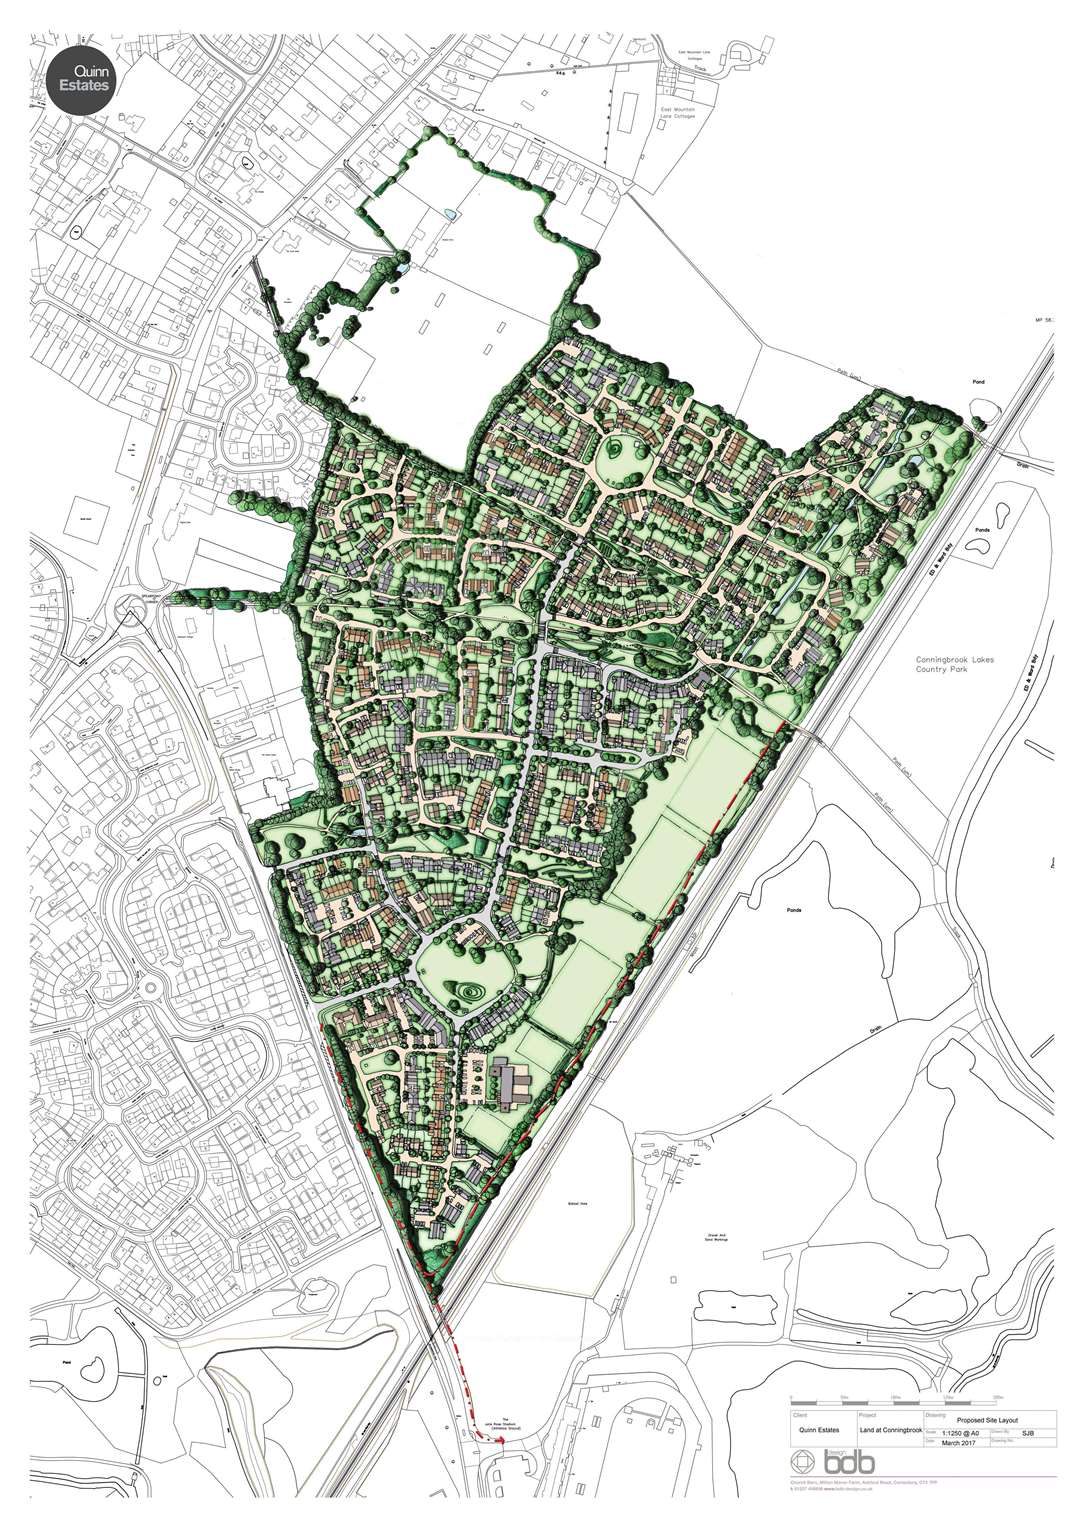 The masterplan for the Conningbrook Park development. (16064928)